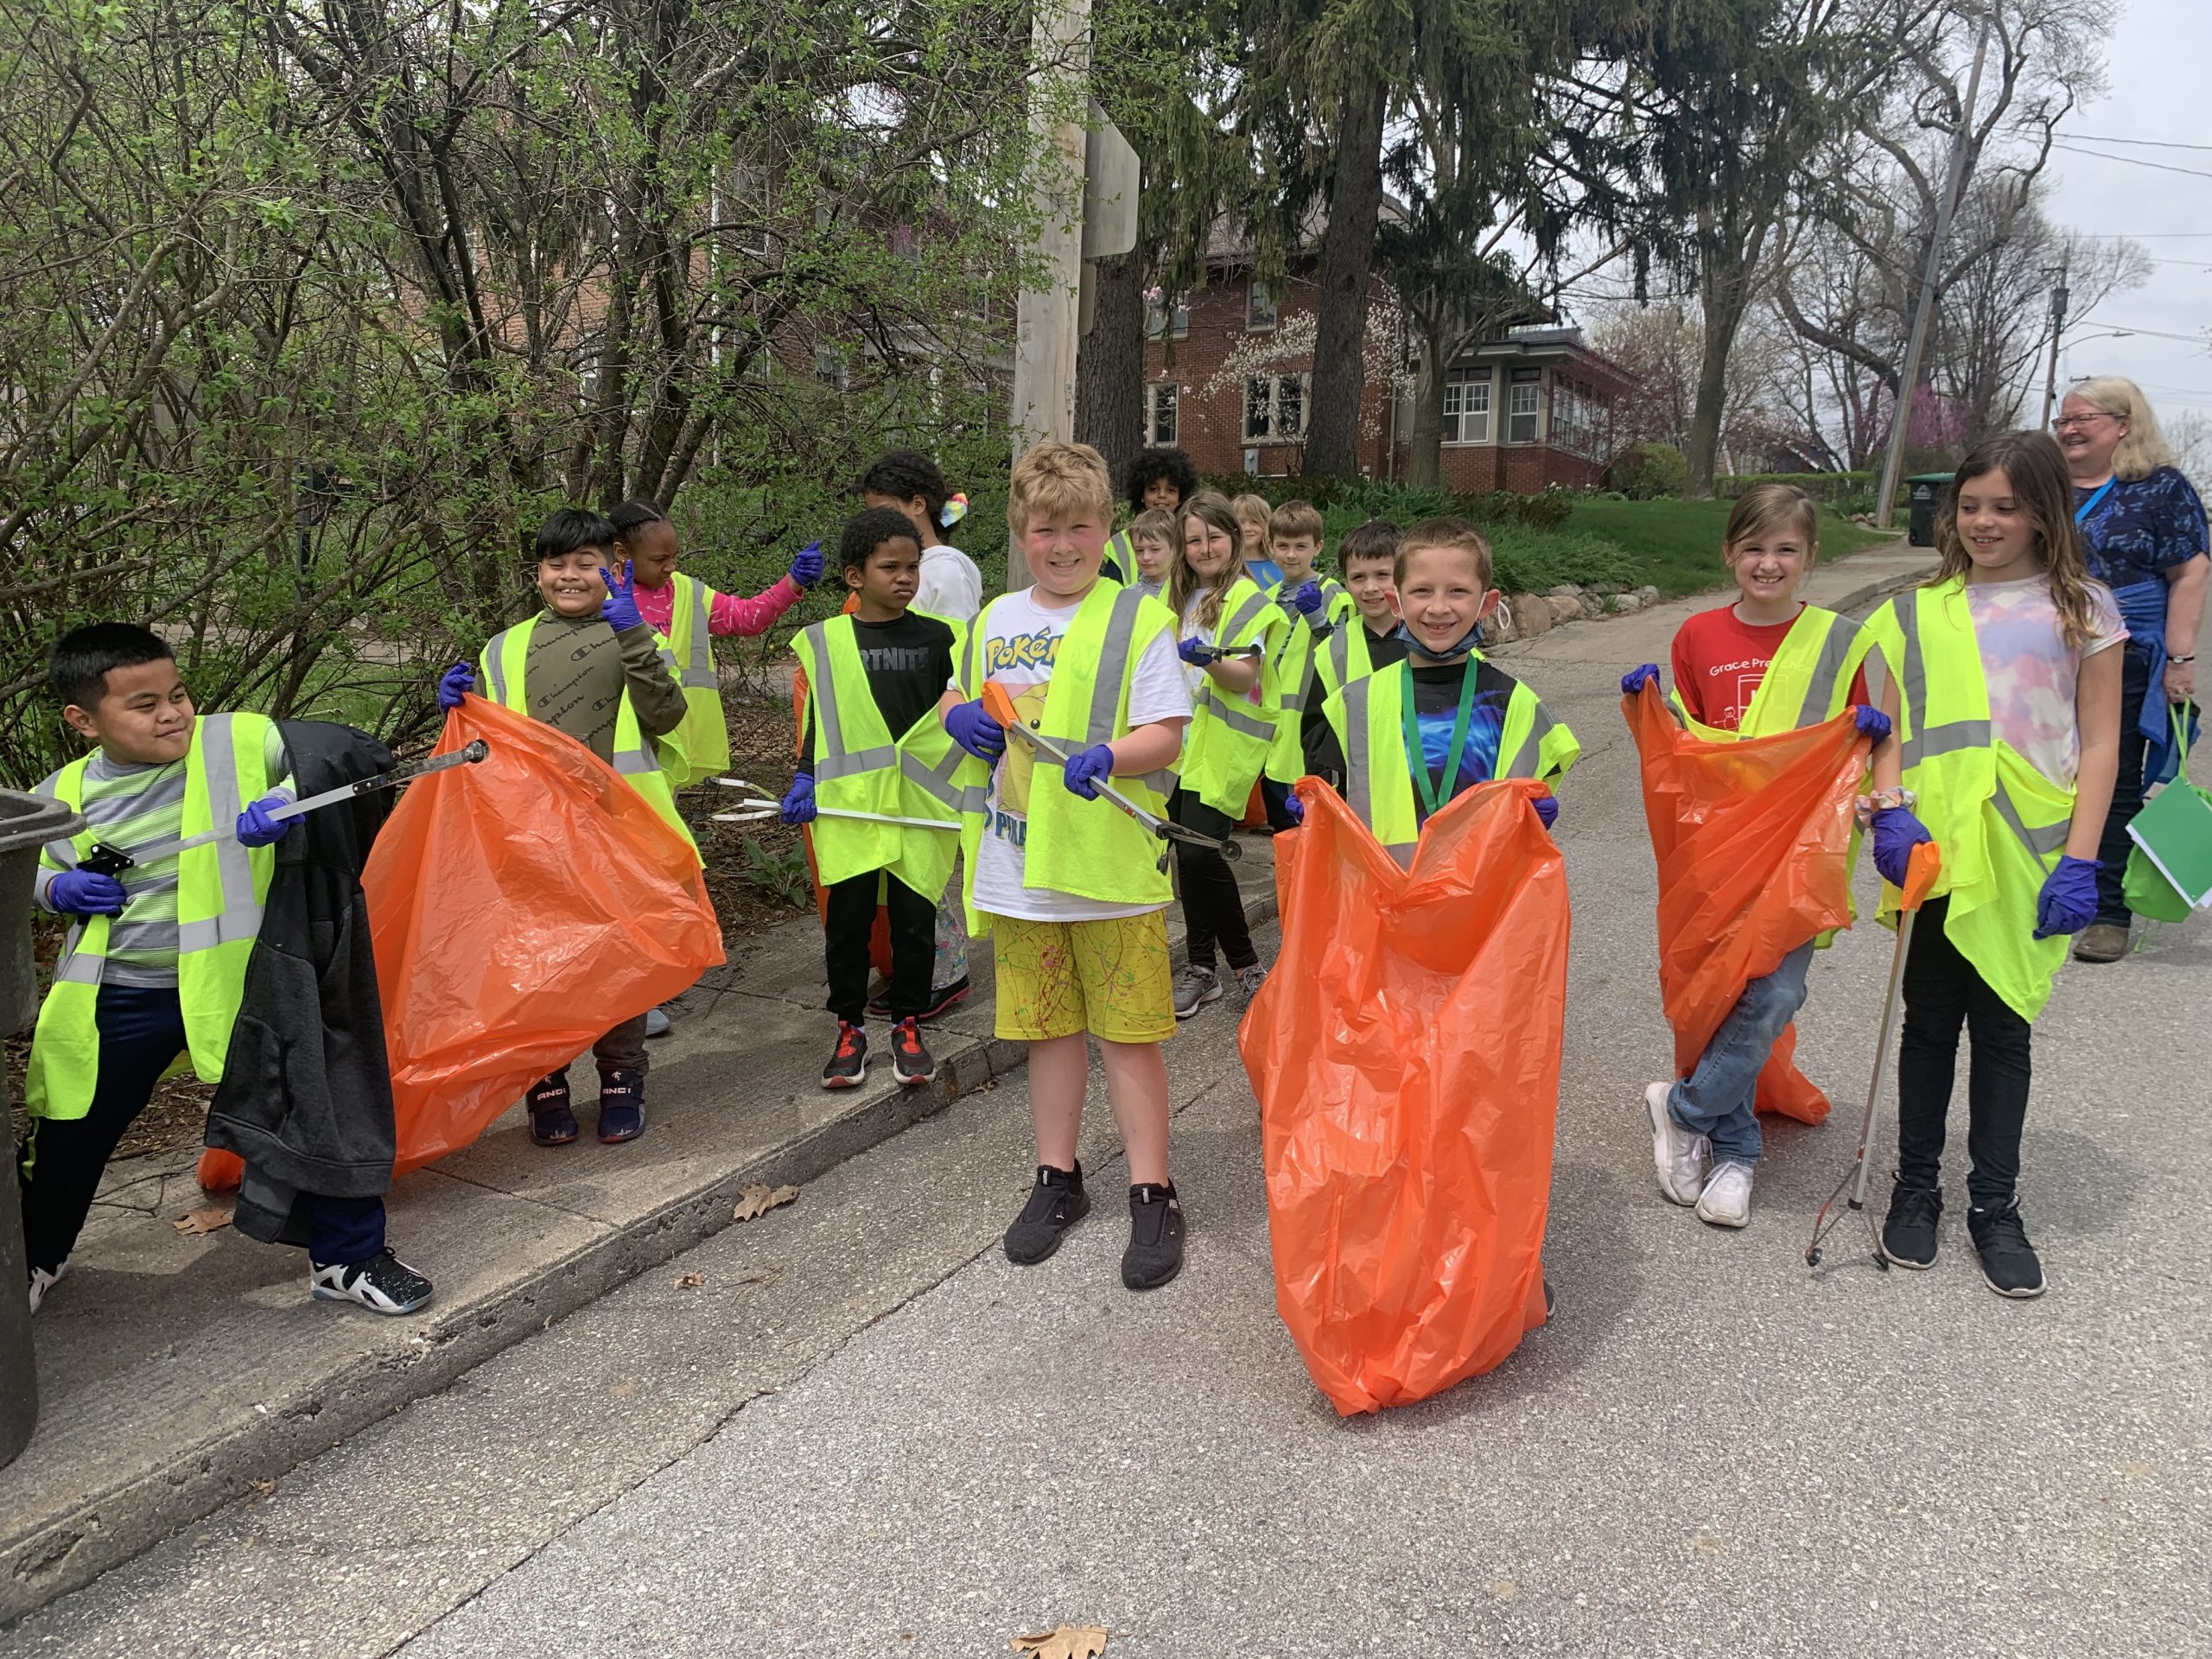 Students pose for a quick photo during the neighborhood cleanup walk.